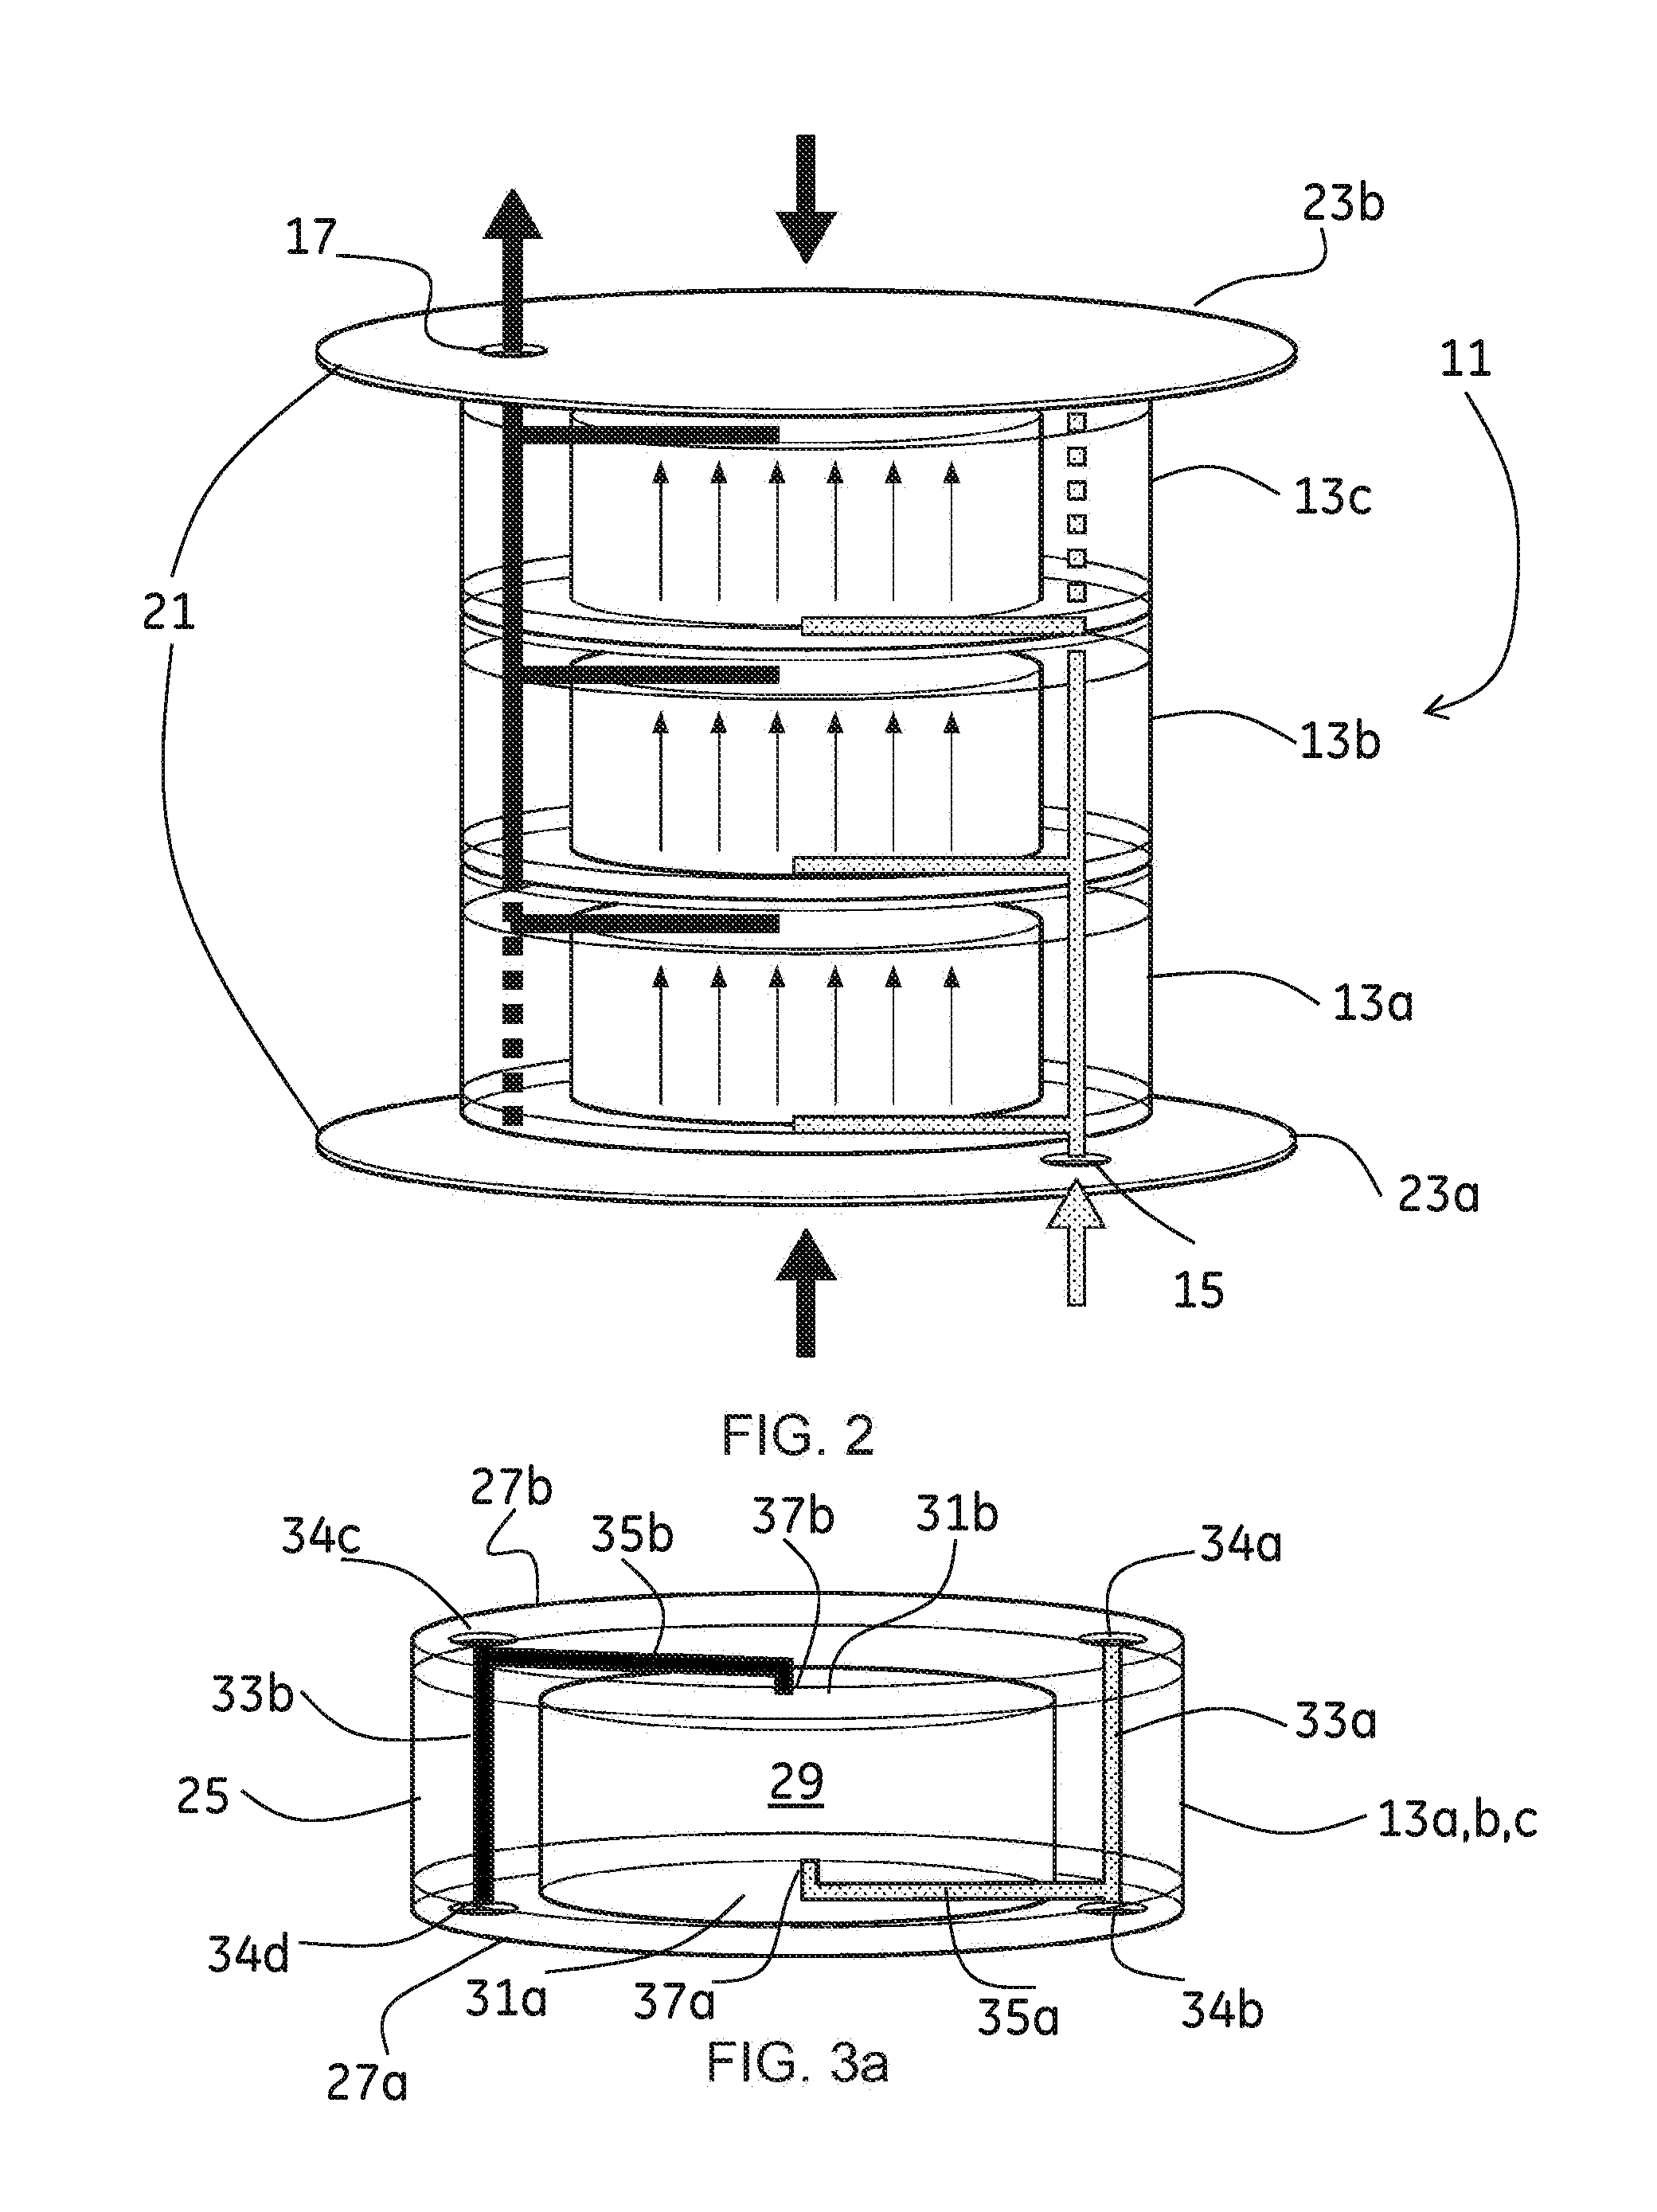 Parallel assembly of chromatography column modules